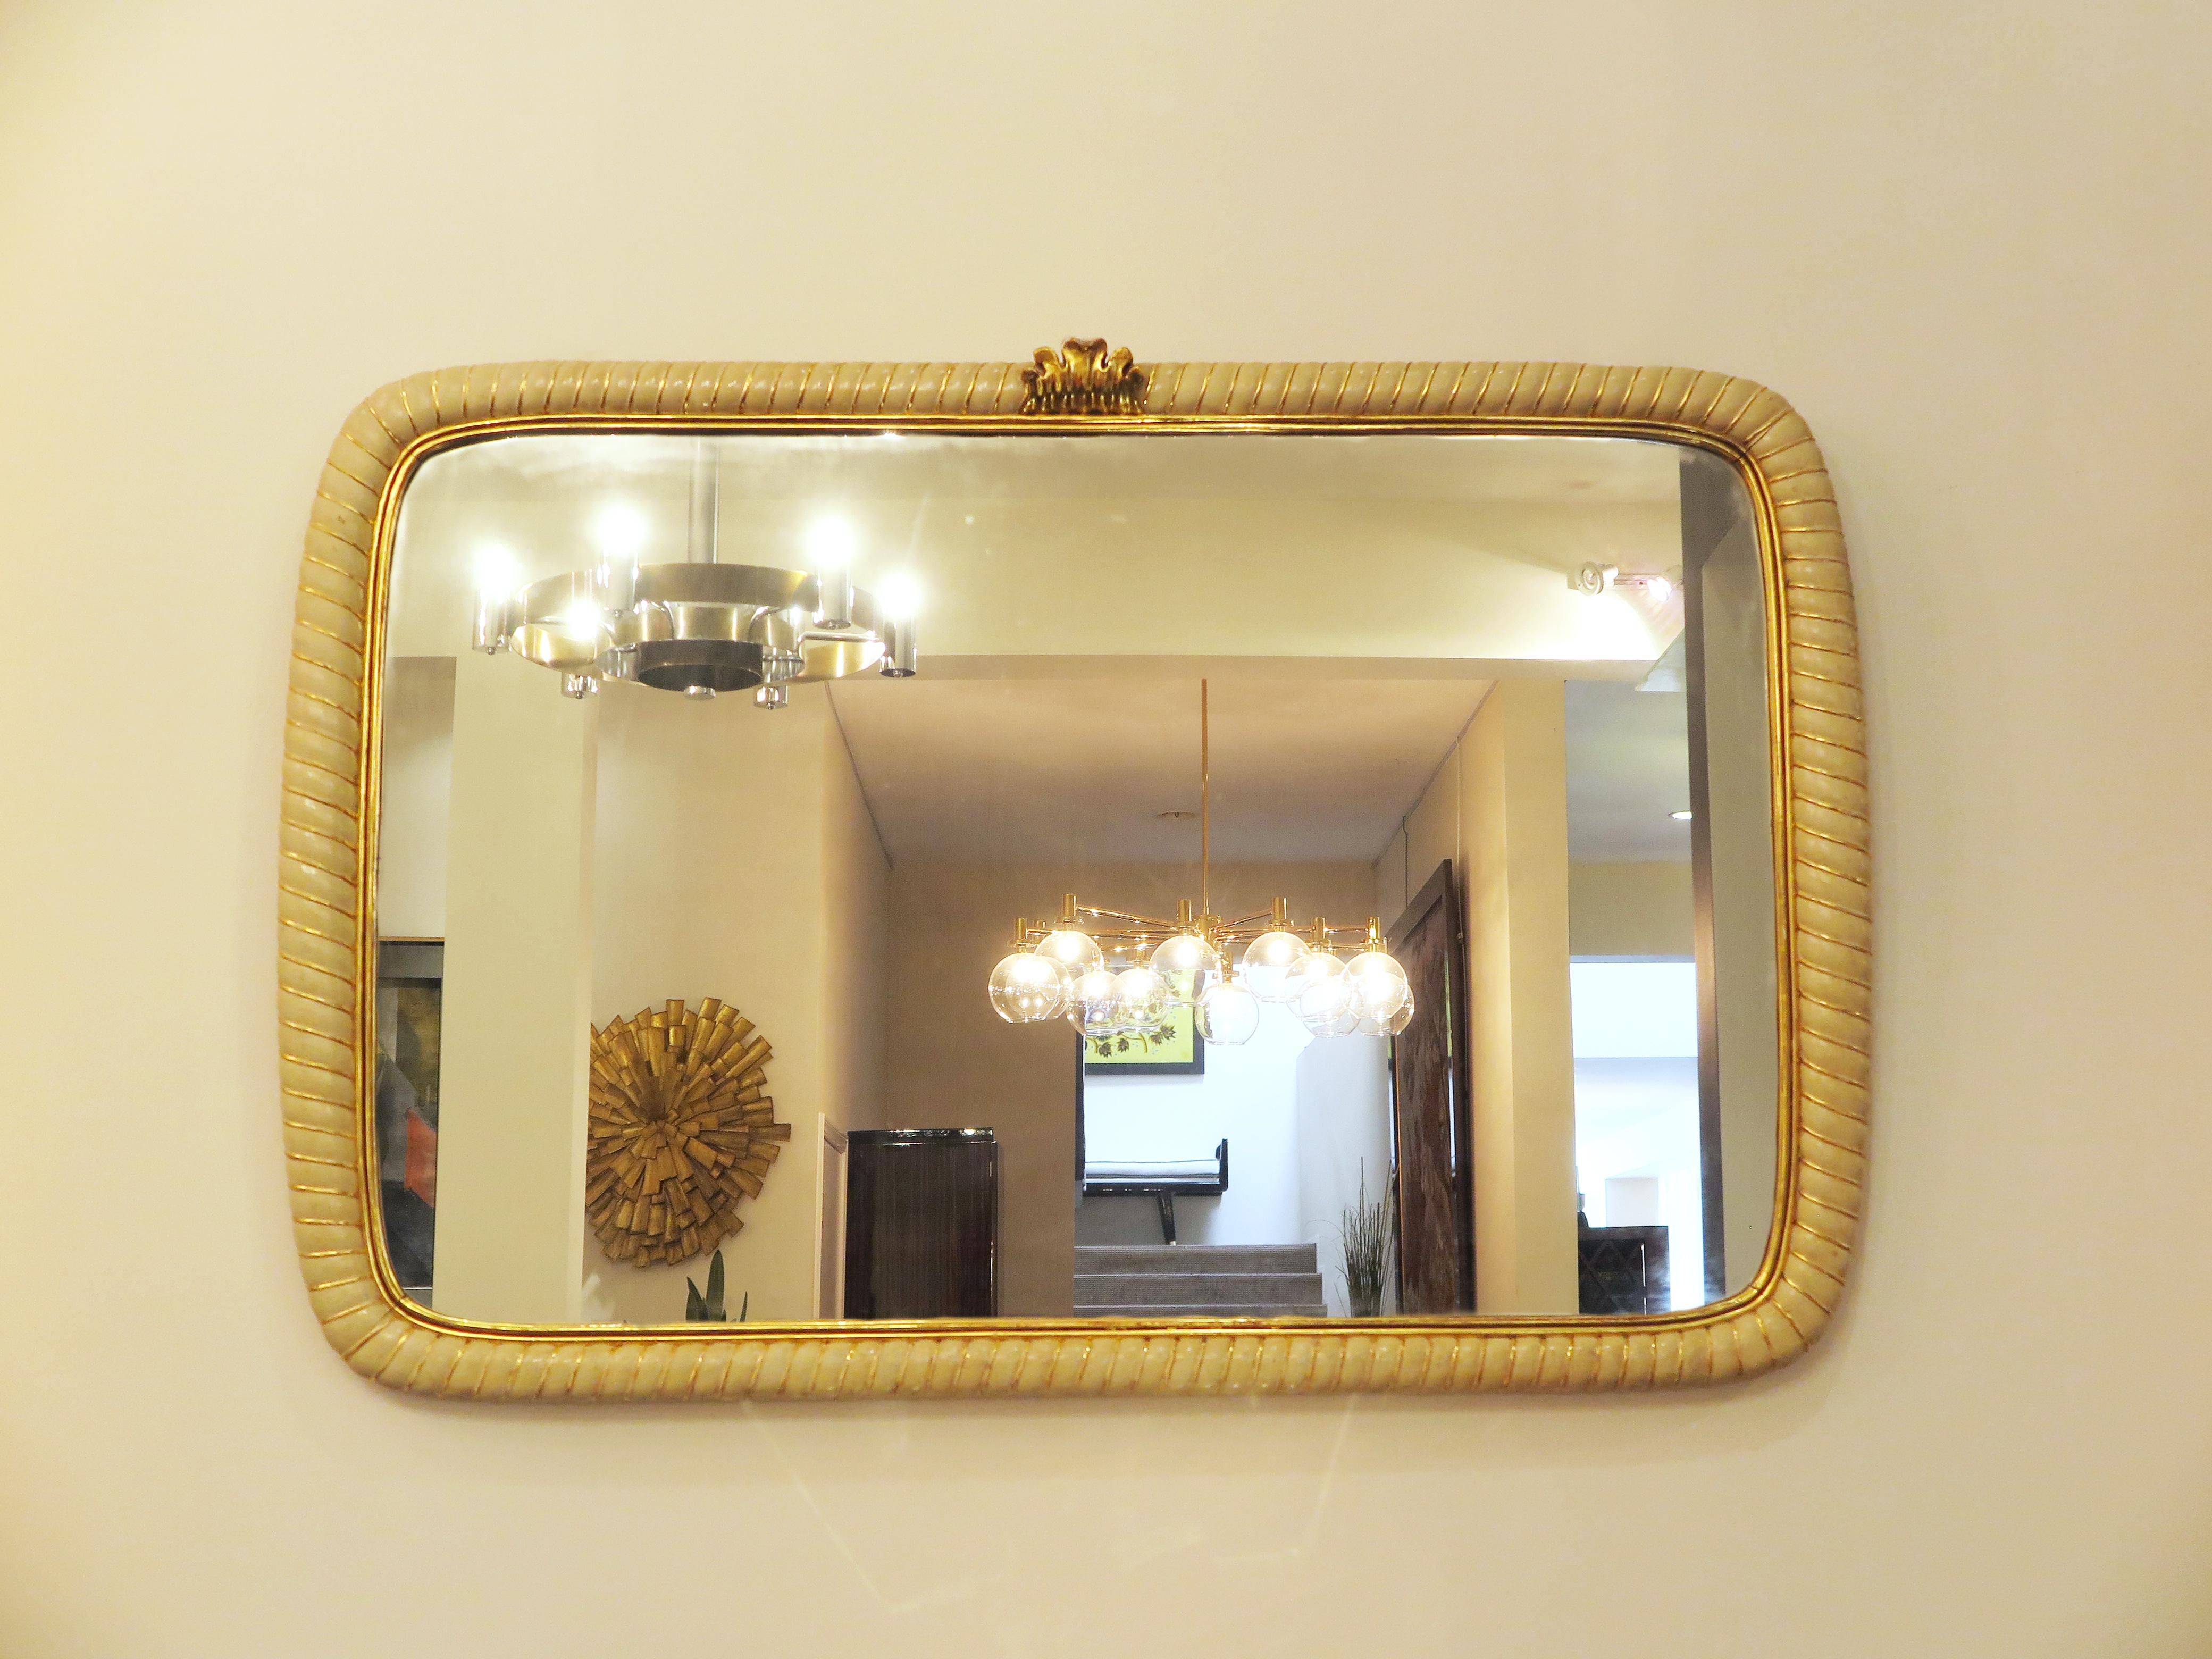 Italian mid-century mirror in ivory lacquer. The scalloped carved design features gilded divisions and a gilded crown-like ornamentation on the top. Original condition.